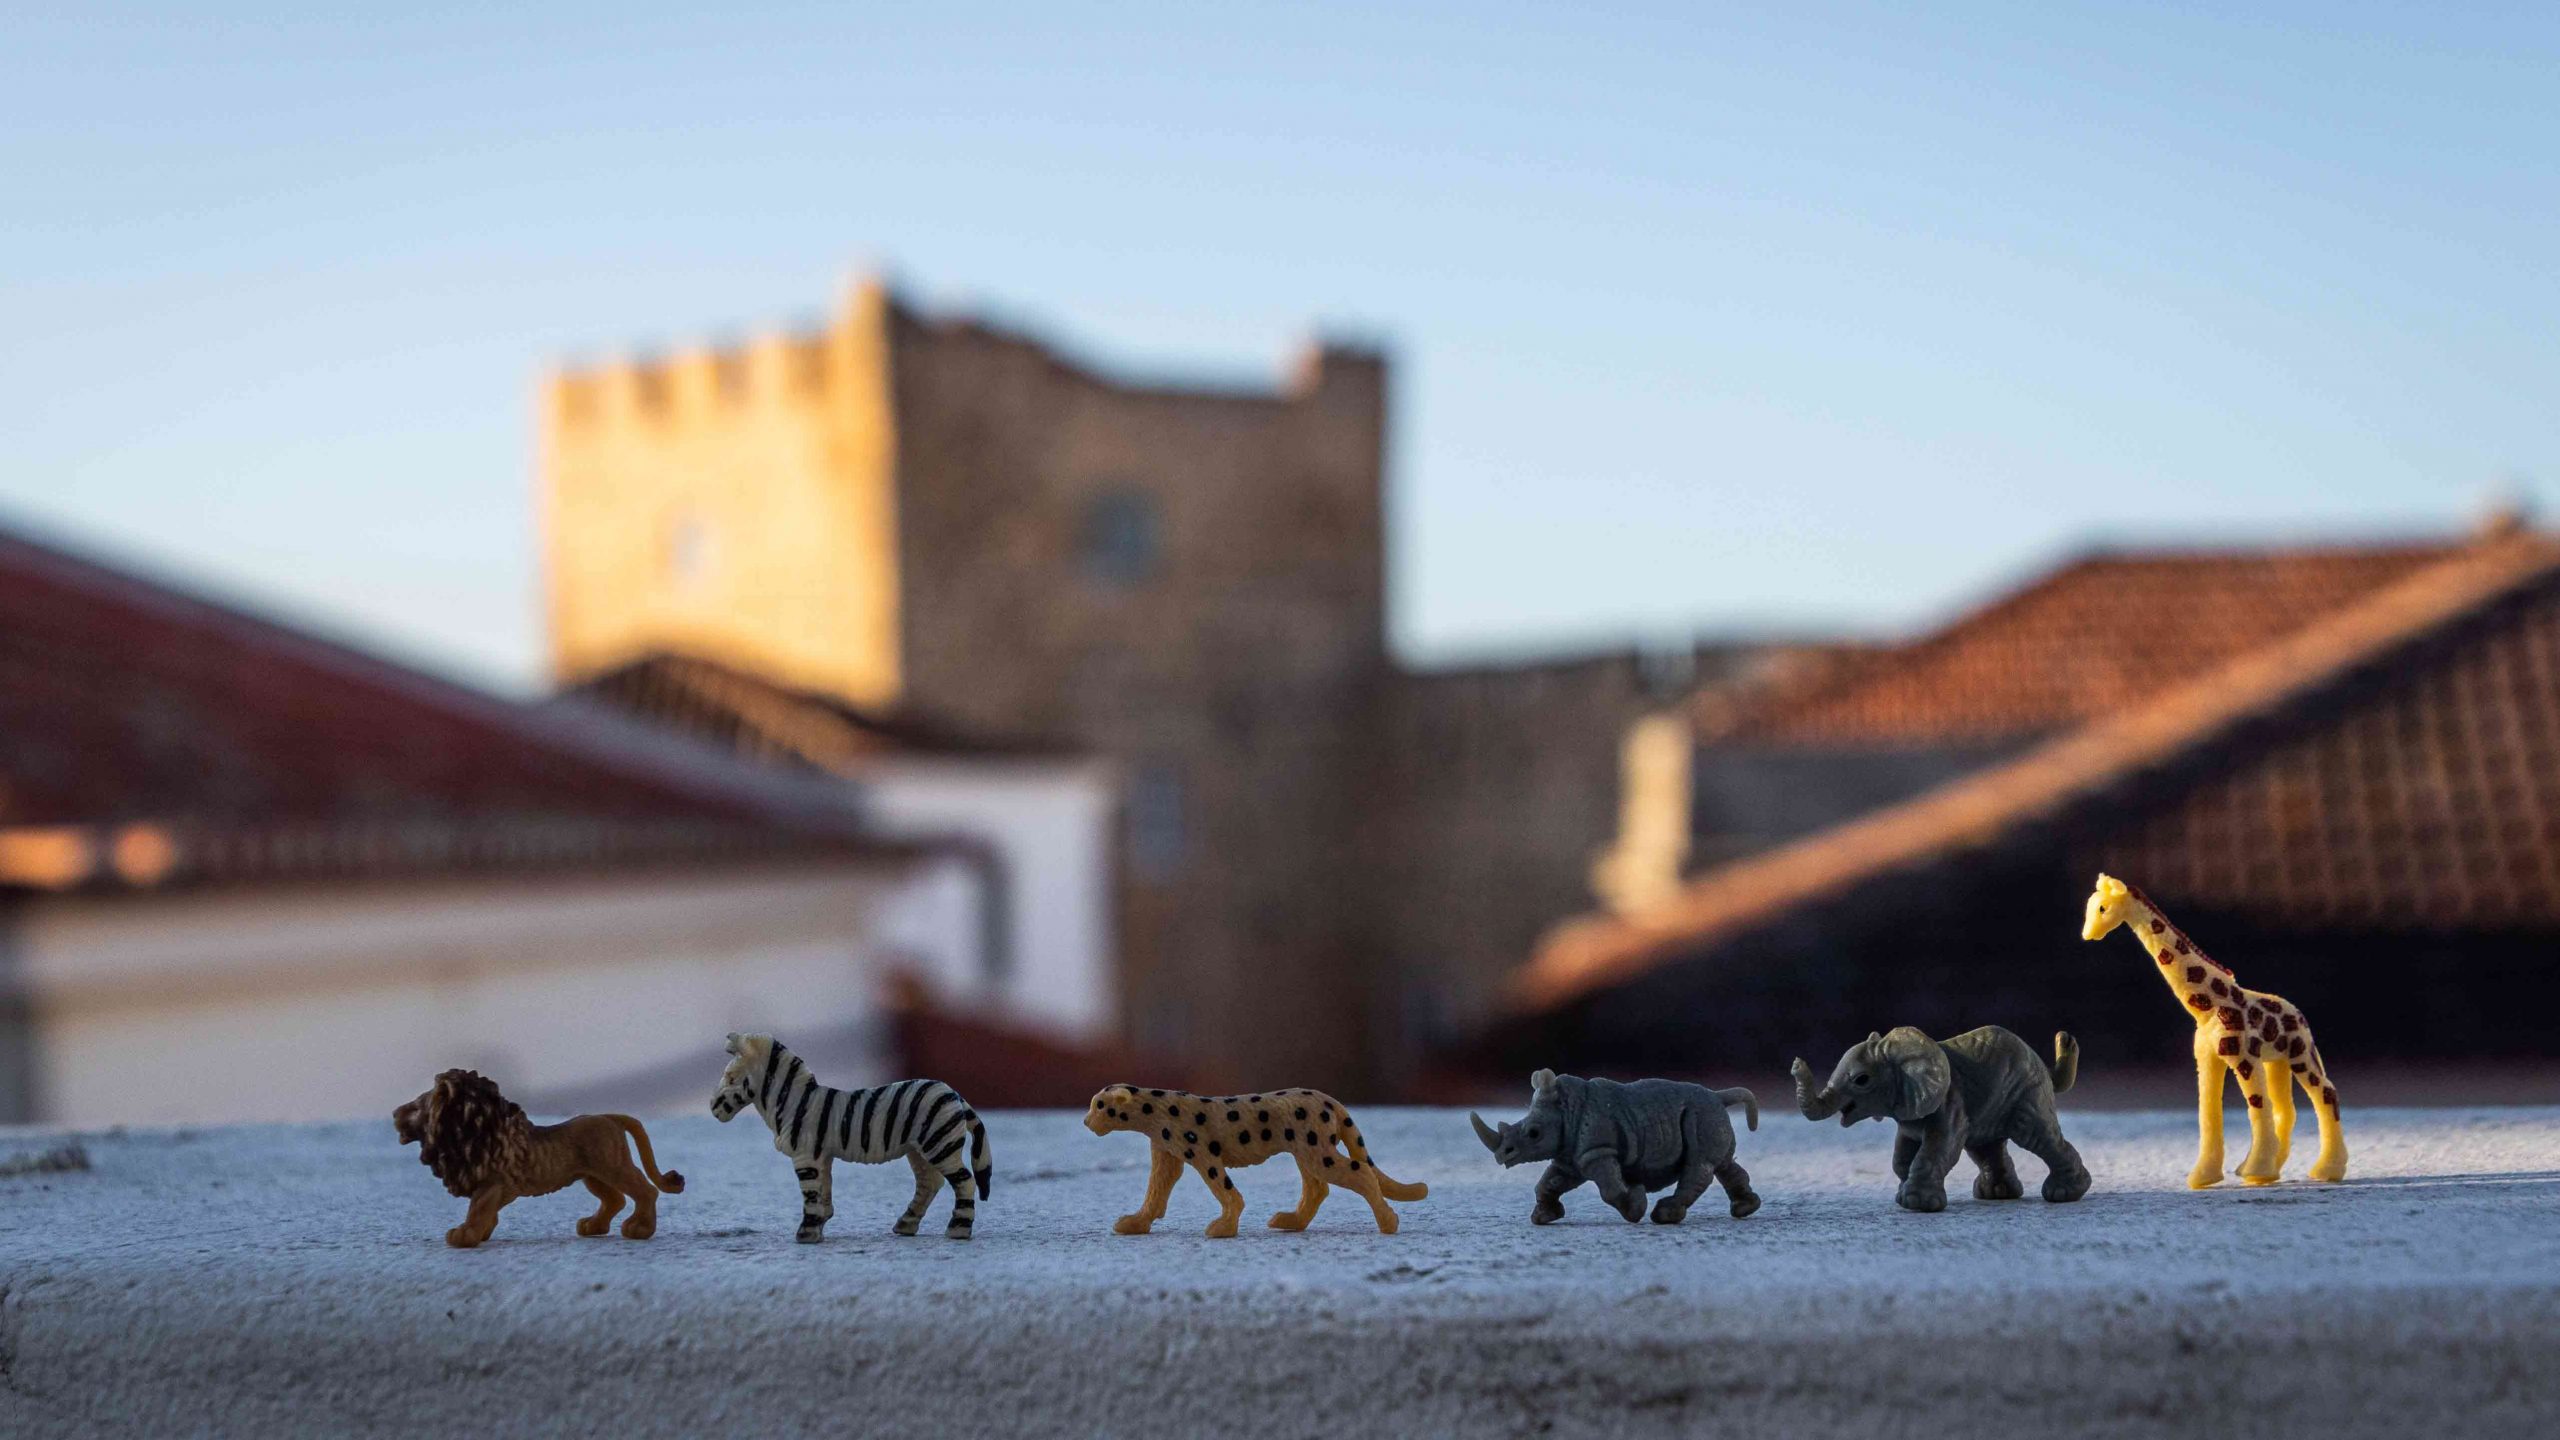 a row of toy animals: conservation and impact